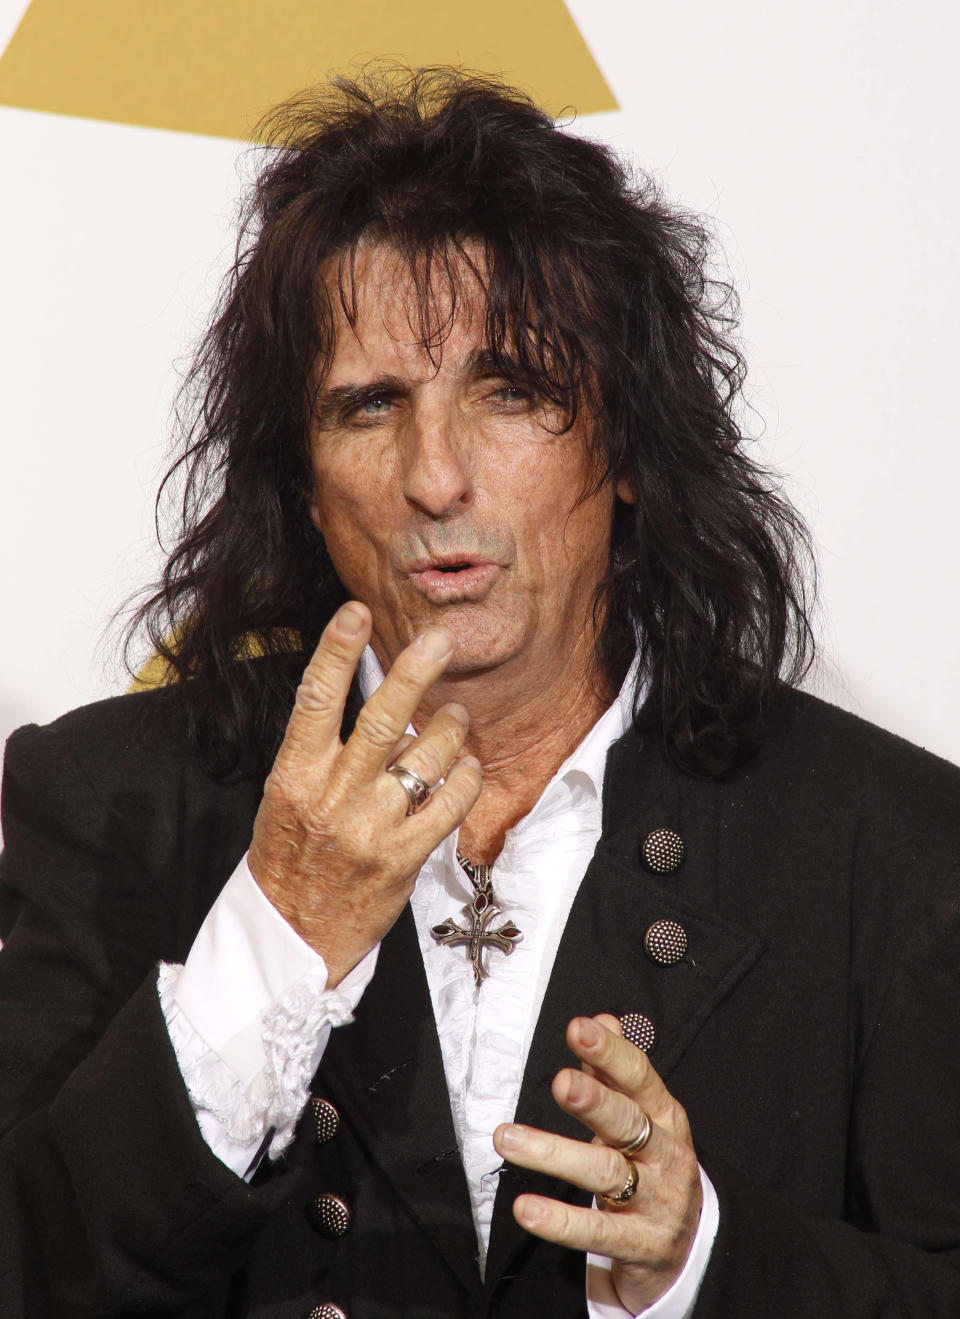 Alice Cooper poses backstage after presenting at the 52nd annual Grammy Awards in Los Angeles January 31, 2010.  REUTERS/Lucy Nicholson  (MUSIC-GRAMMYS/WINNERS) (UNITED STATES - Tags: ENTERTAINMENT)